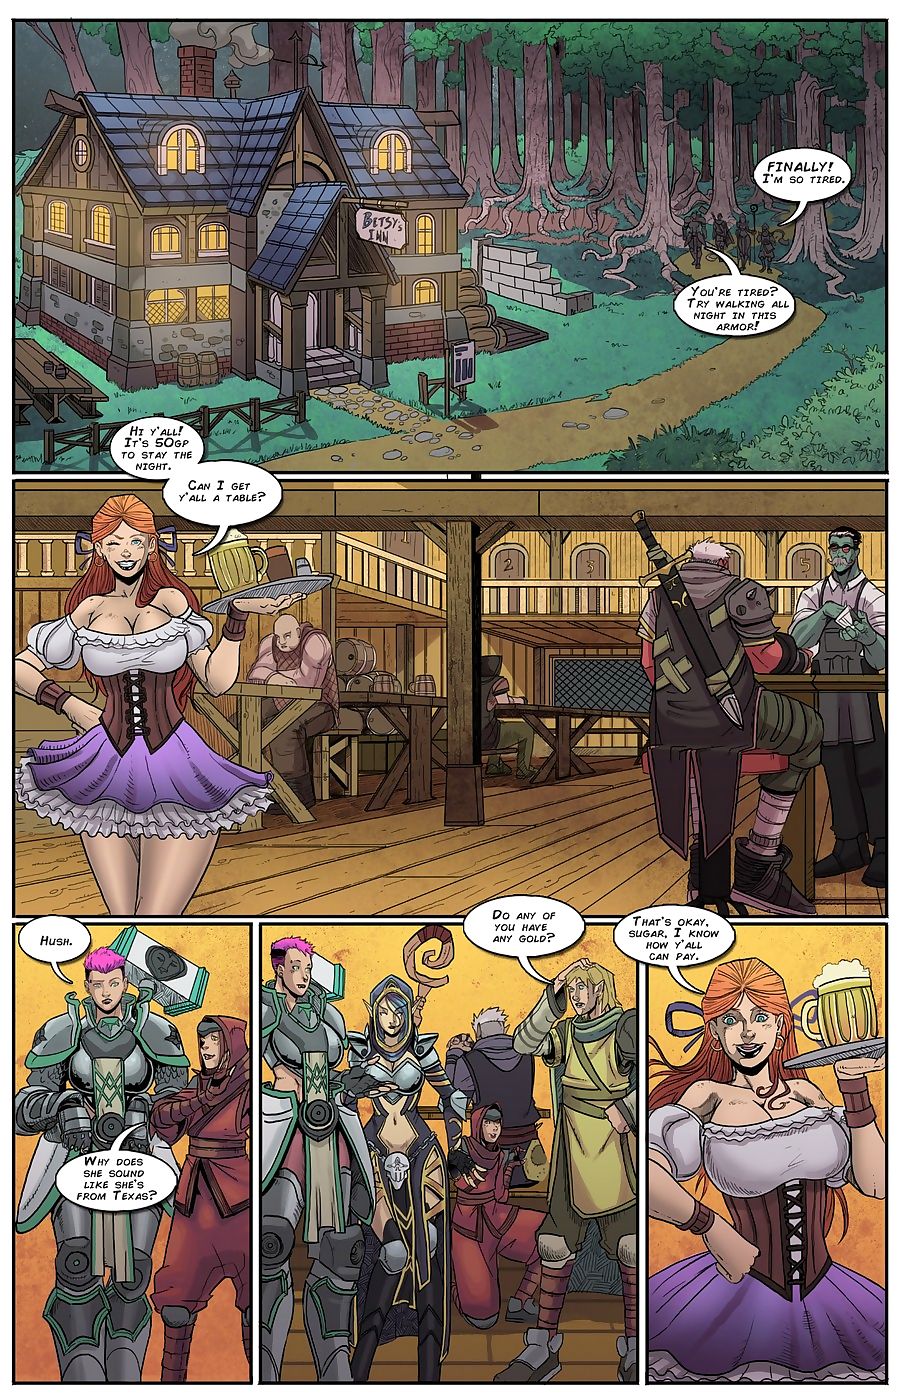 Bot- Lost Age Issue 1 page 1